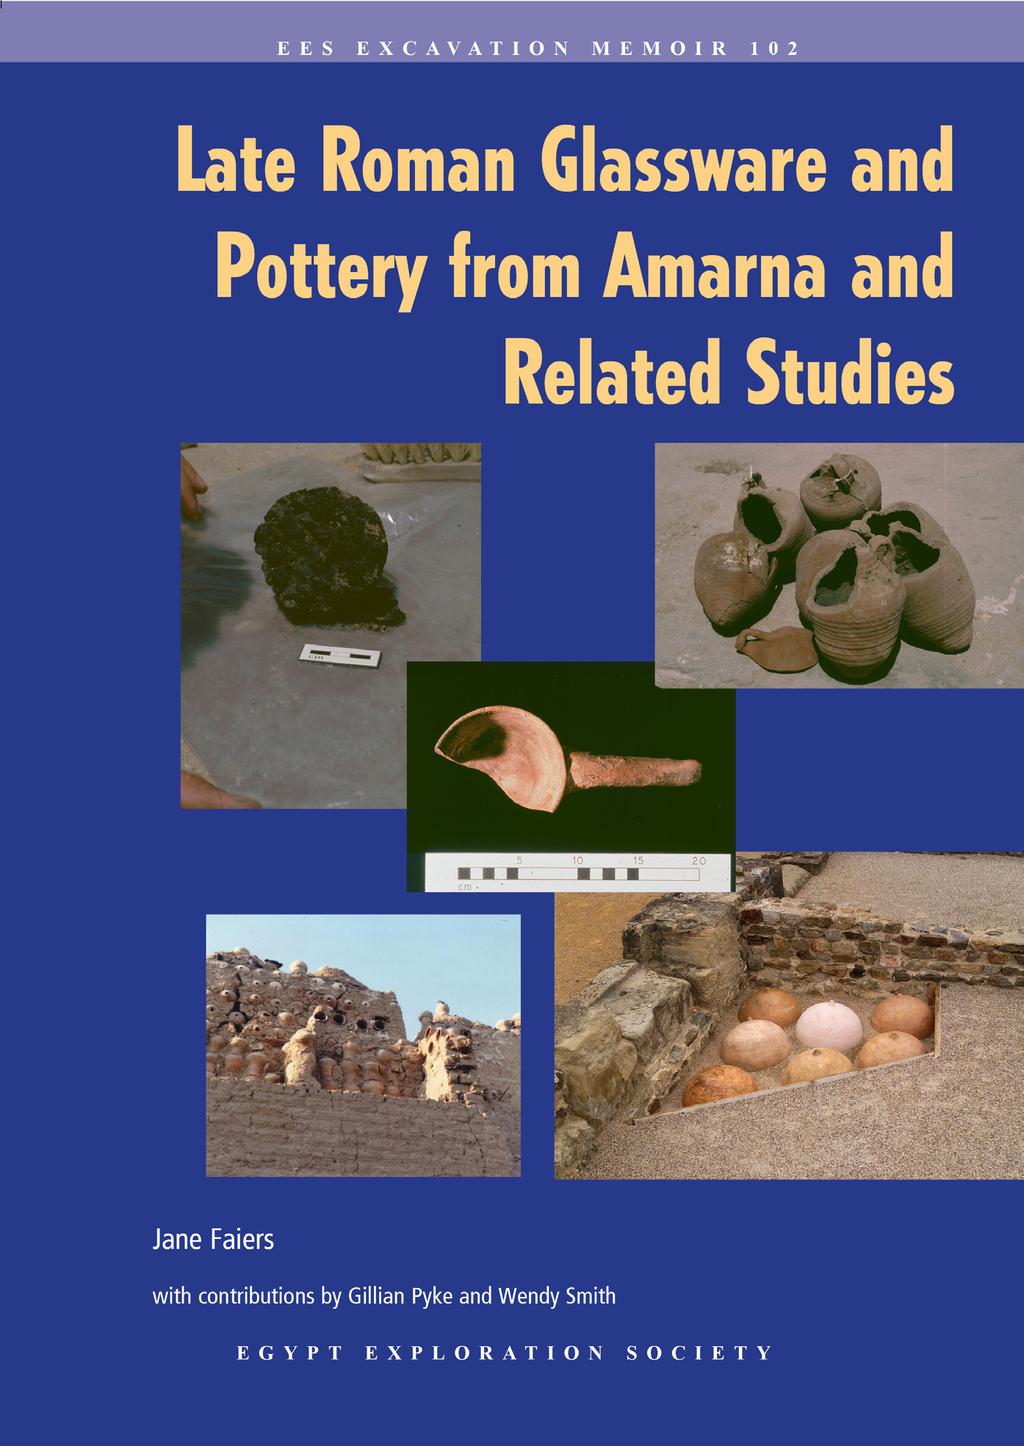 Late Roman Glassware and Pottery from Amarna and Related Studies Author: Jane Faiers Year of publication: 2013 Jane Faiers Late Roman Glassware and Pottery from Amarna and Related Studies is